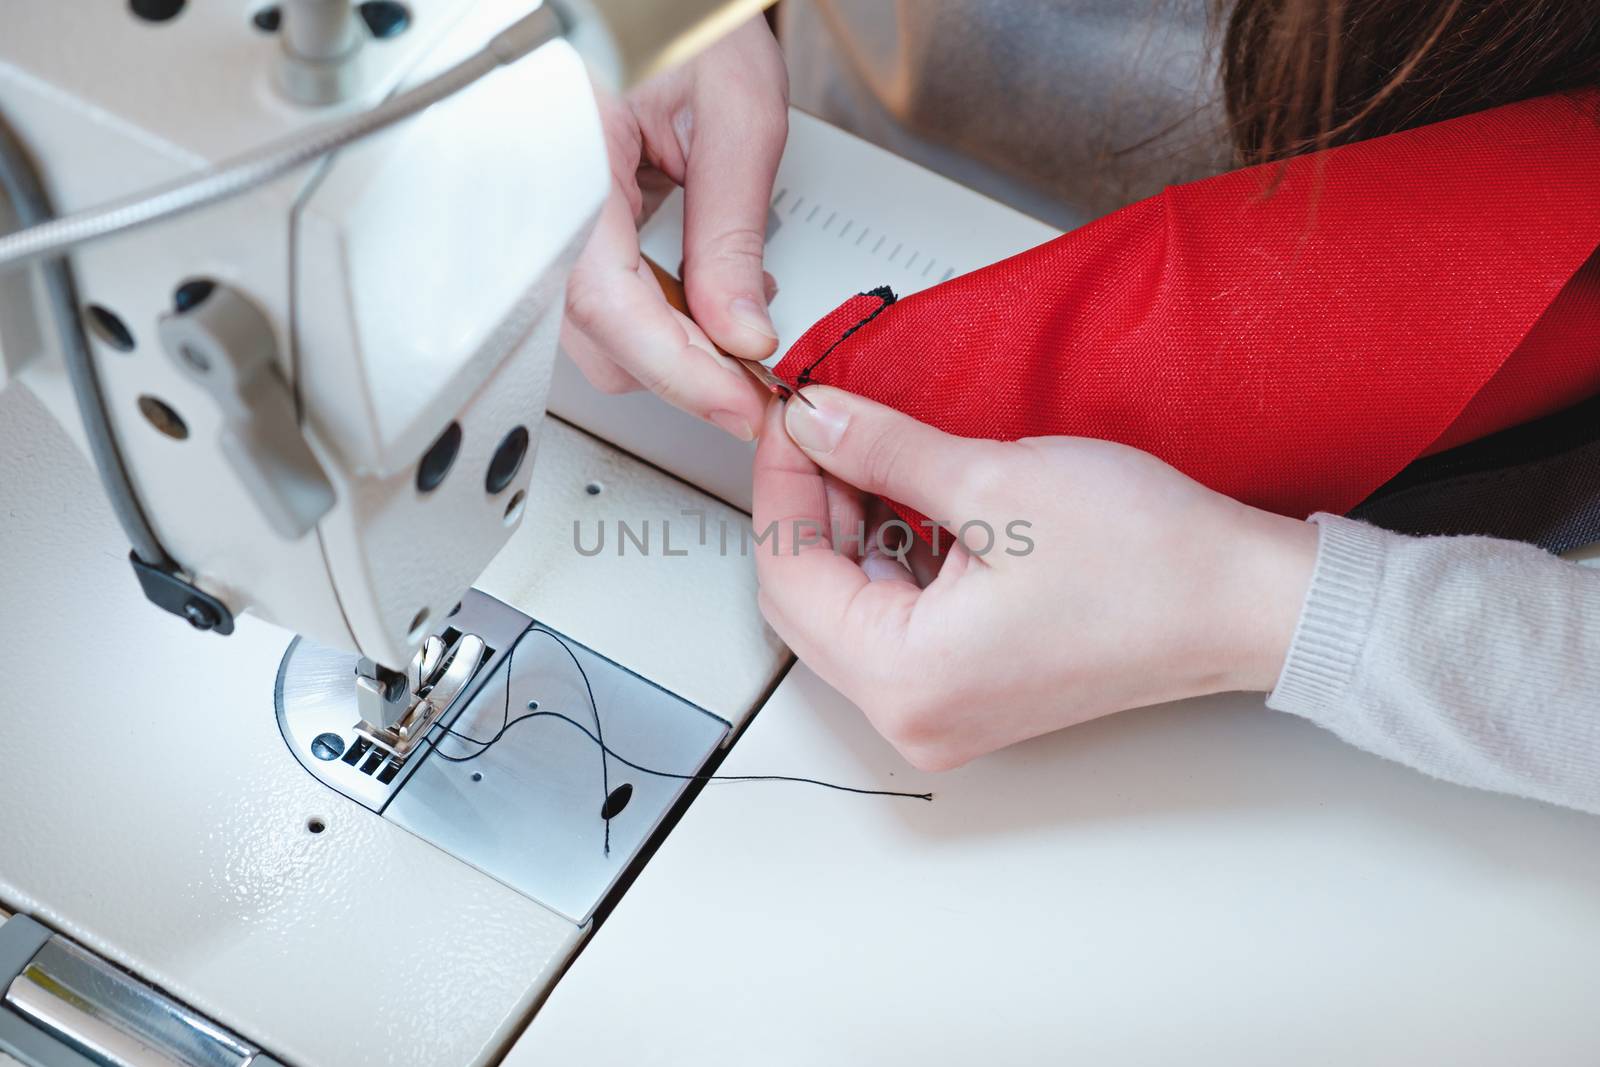 Seamstress hands at work. Needlewoman at overlock sewing machine doing professional work, concept of labor